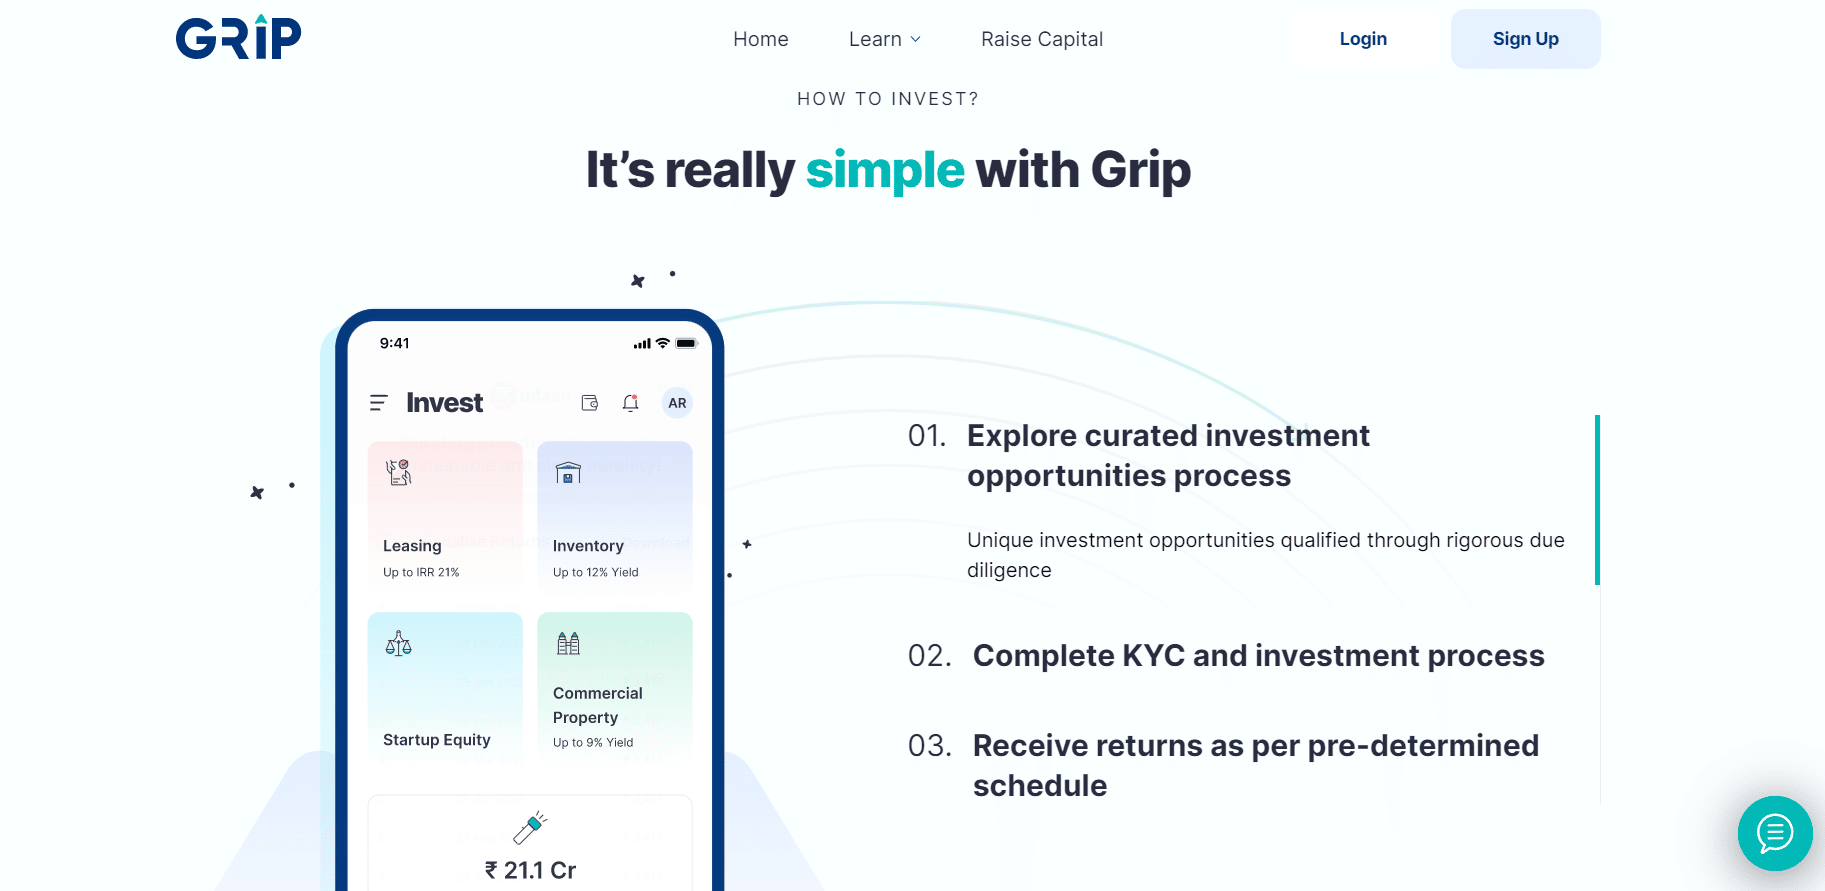 Grip Invest page how to invest section